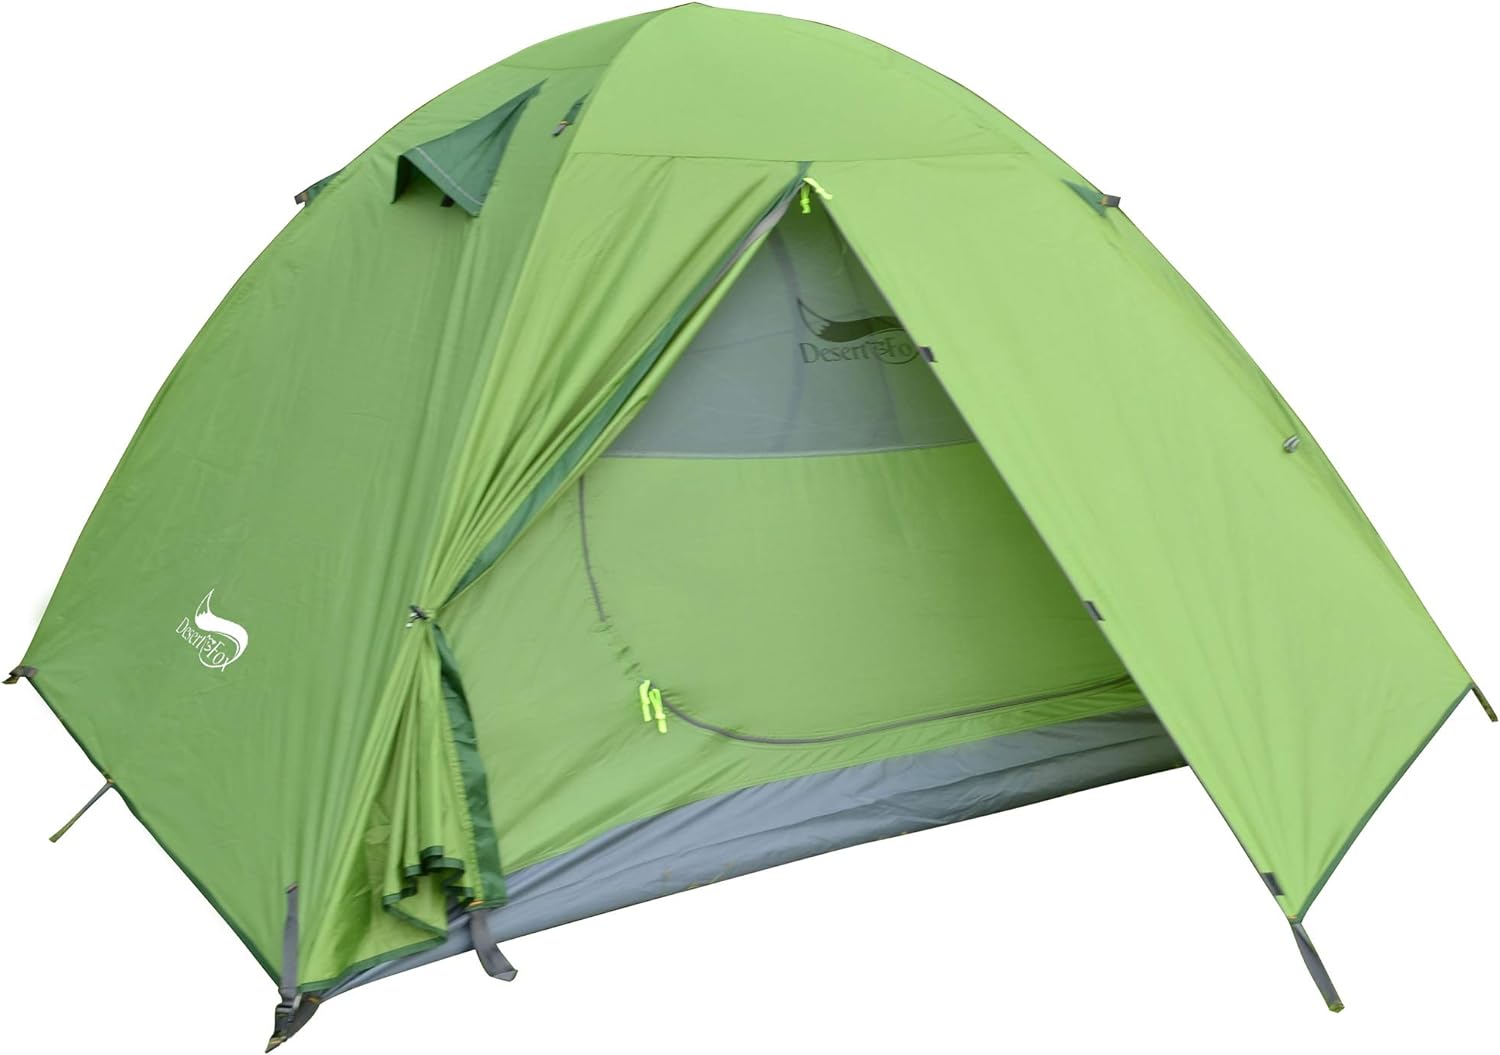 Camping Tents 1/2/3 Person,Outdoor Lightweight Backpacking